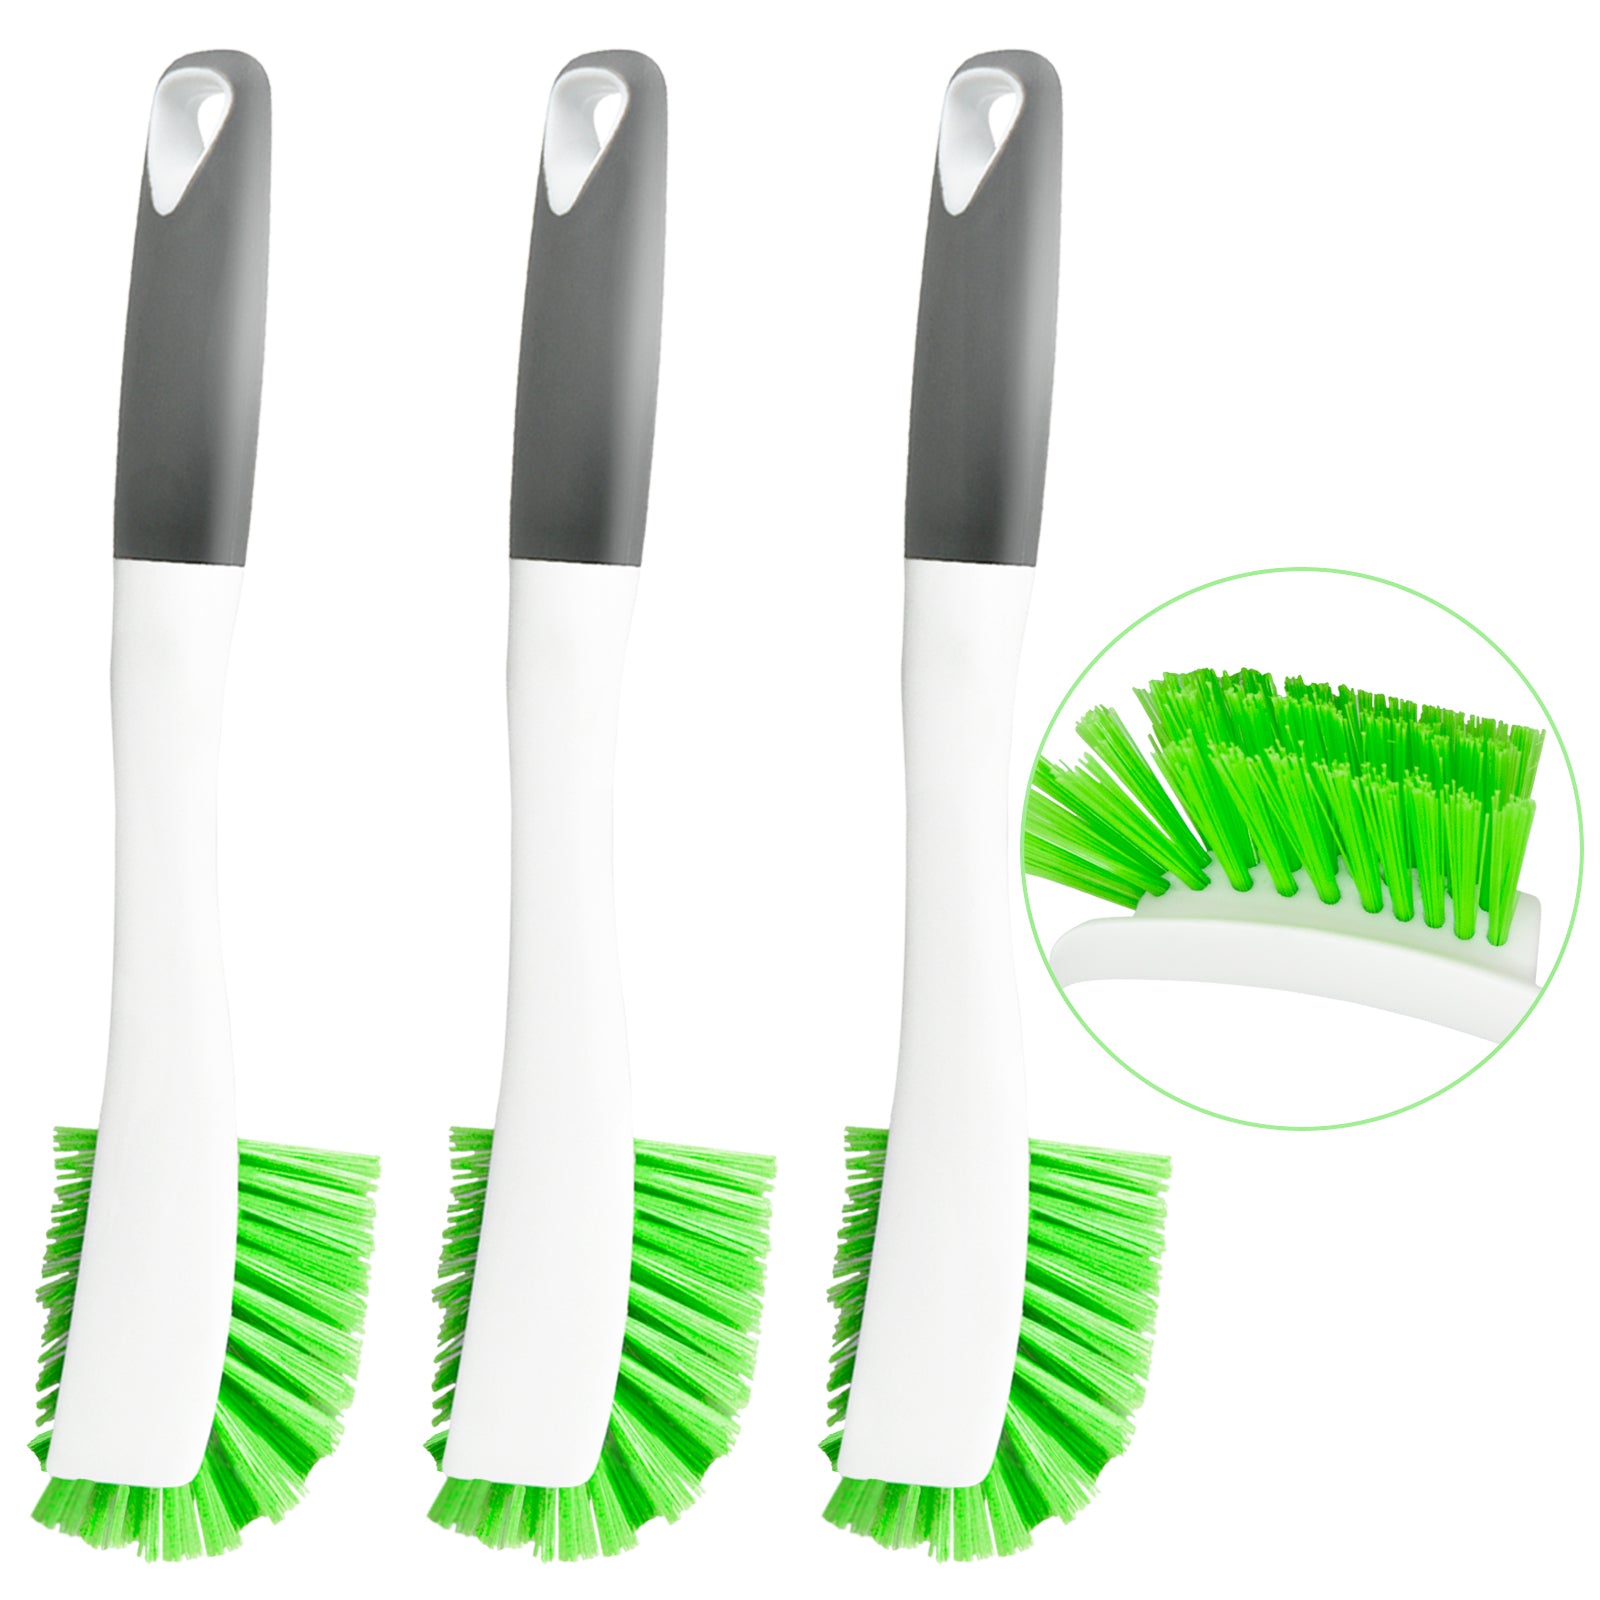 2 Pack Dish Brush with Handle, Household Kitchen Scrub Brushes for Cleaning, Dish Scrubber with Stiff Bristles for Pots, Pans, Sink